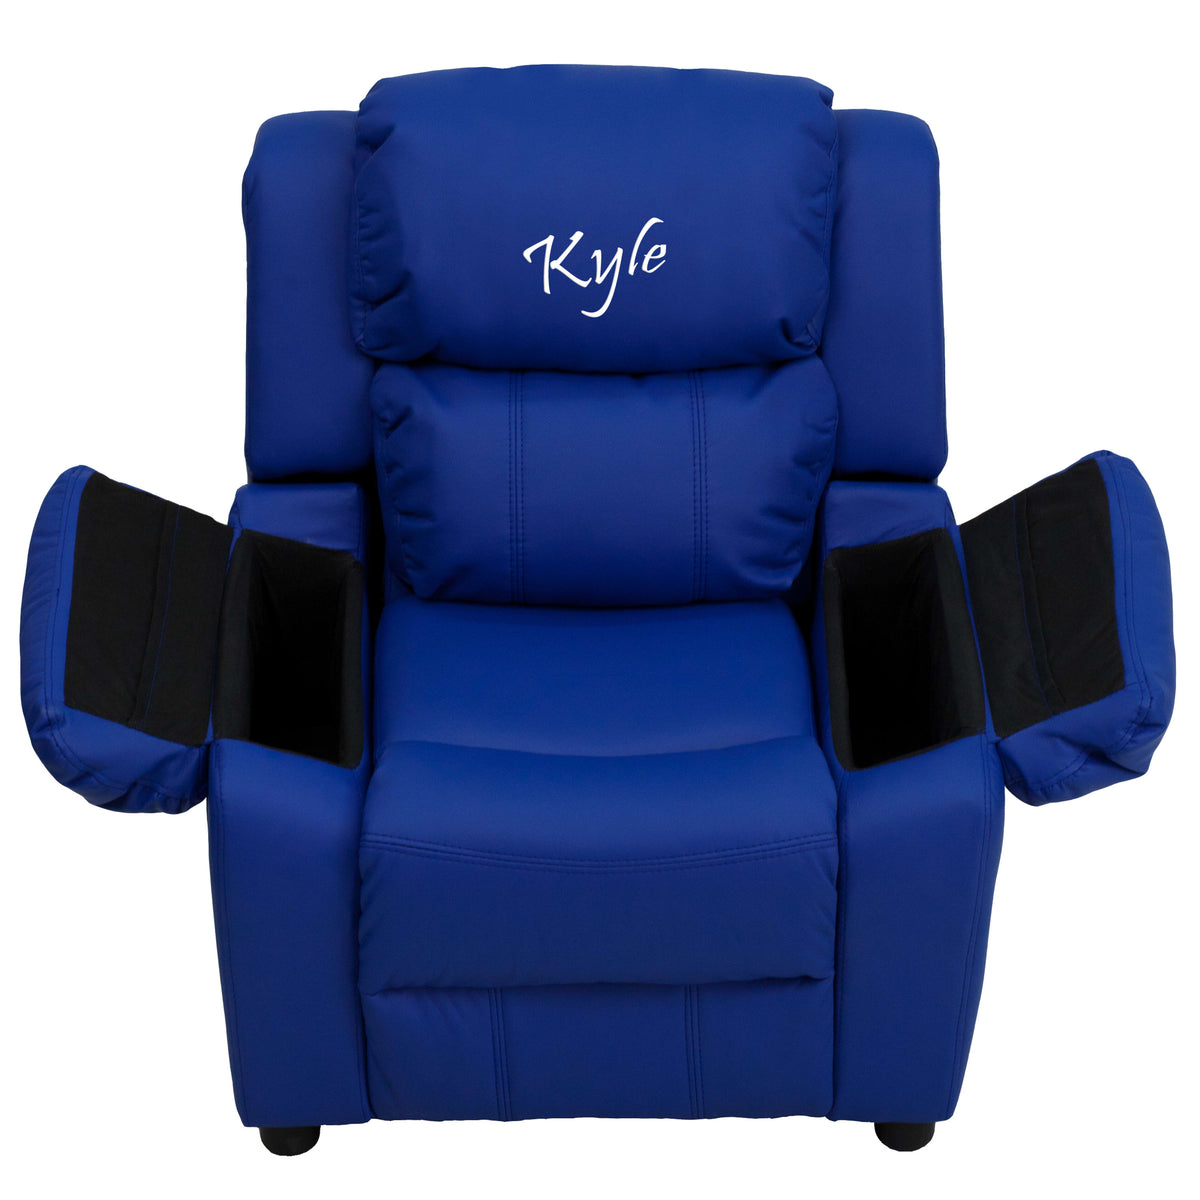 Blue Vinyl |#| Personalized Deluxe Padded Blue Vinyl Kids Recliner with Storage Arms